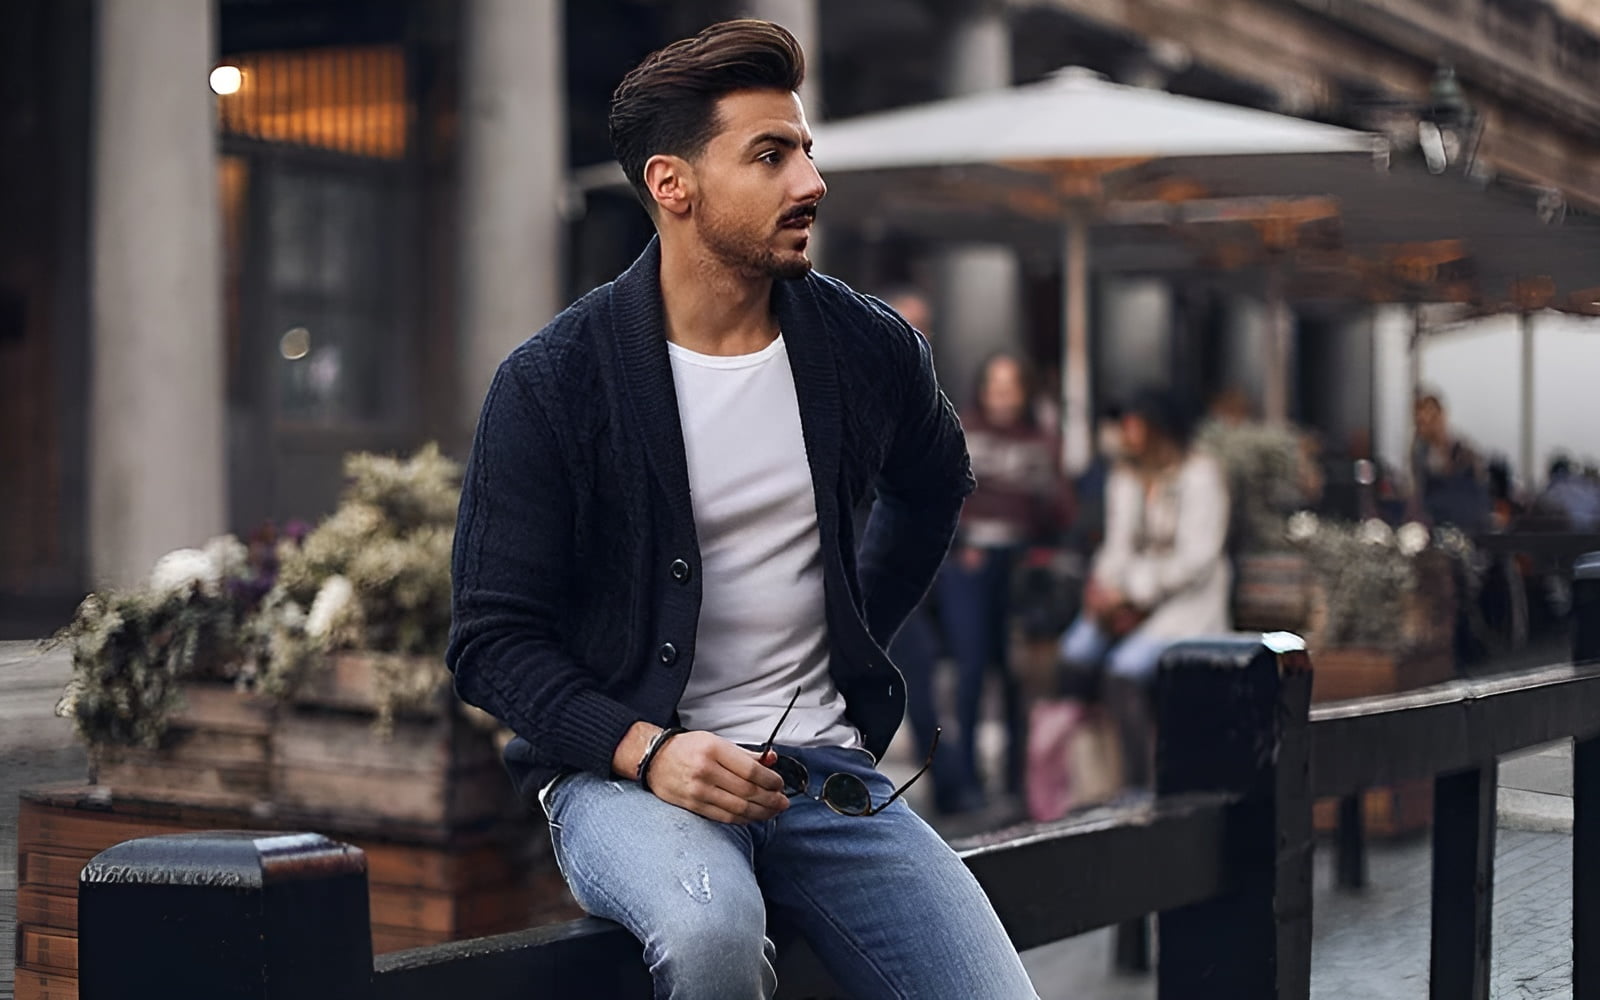 The Complete Men’s Fall Fashion Guide with the Best Outfits